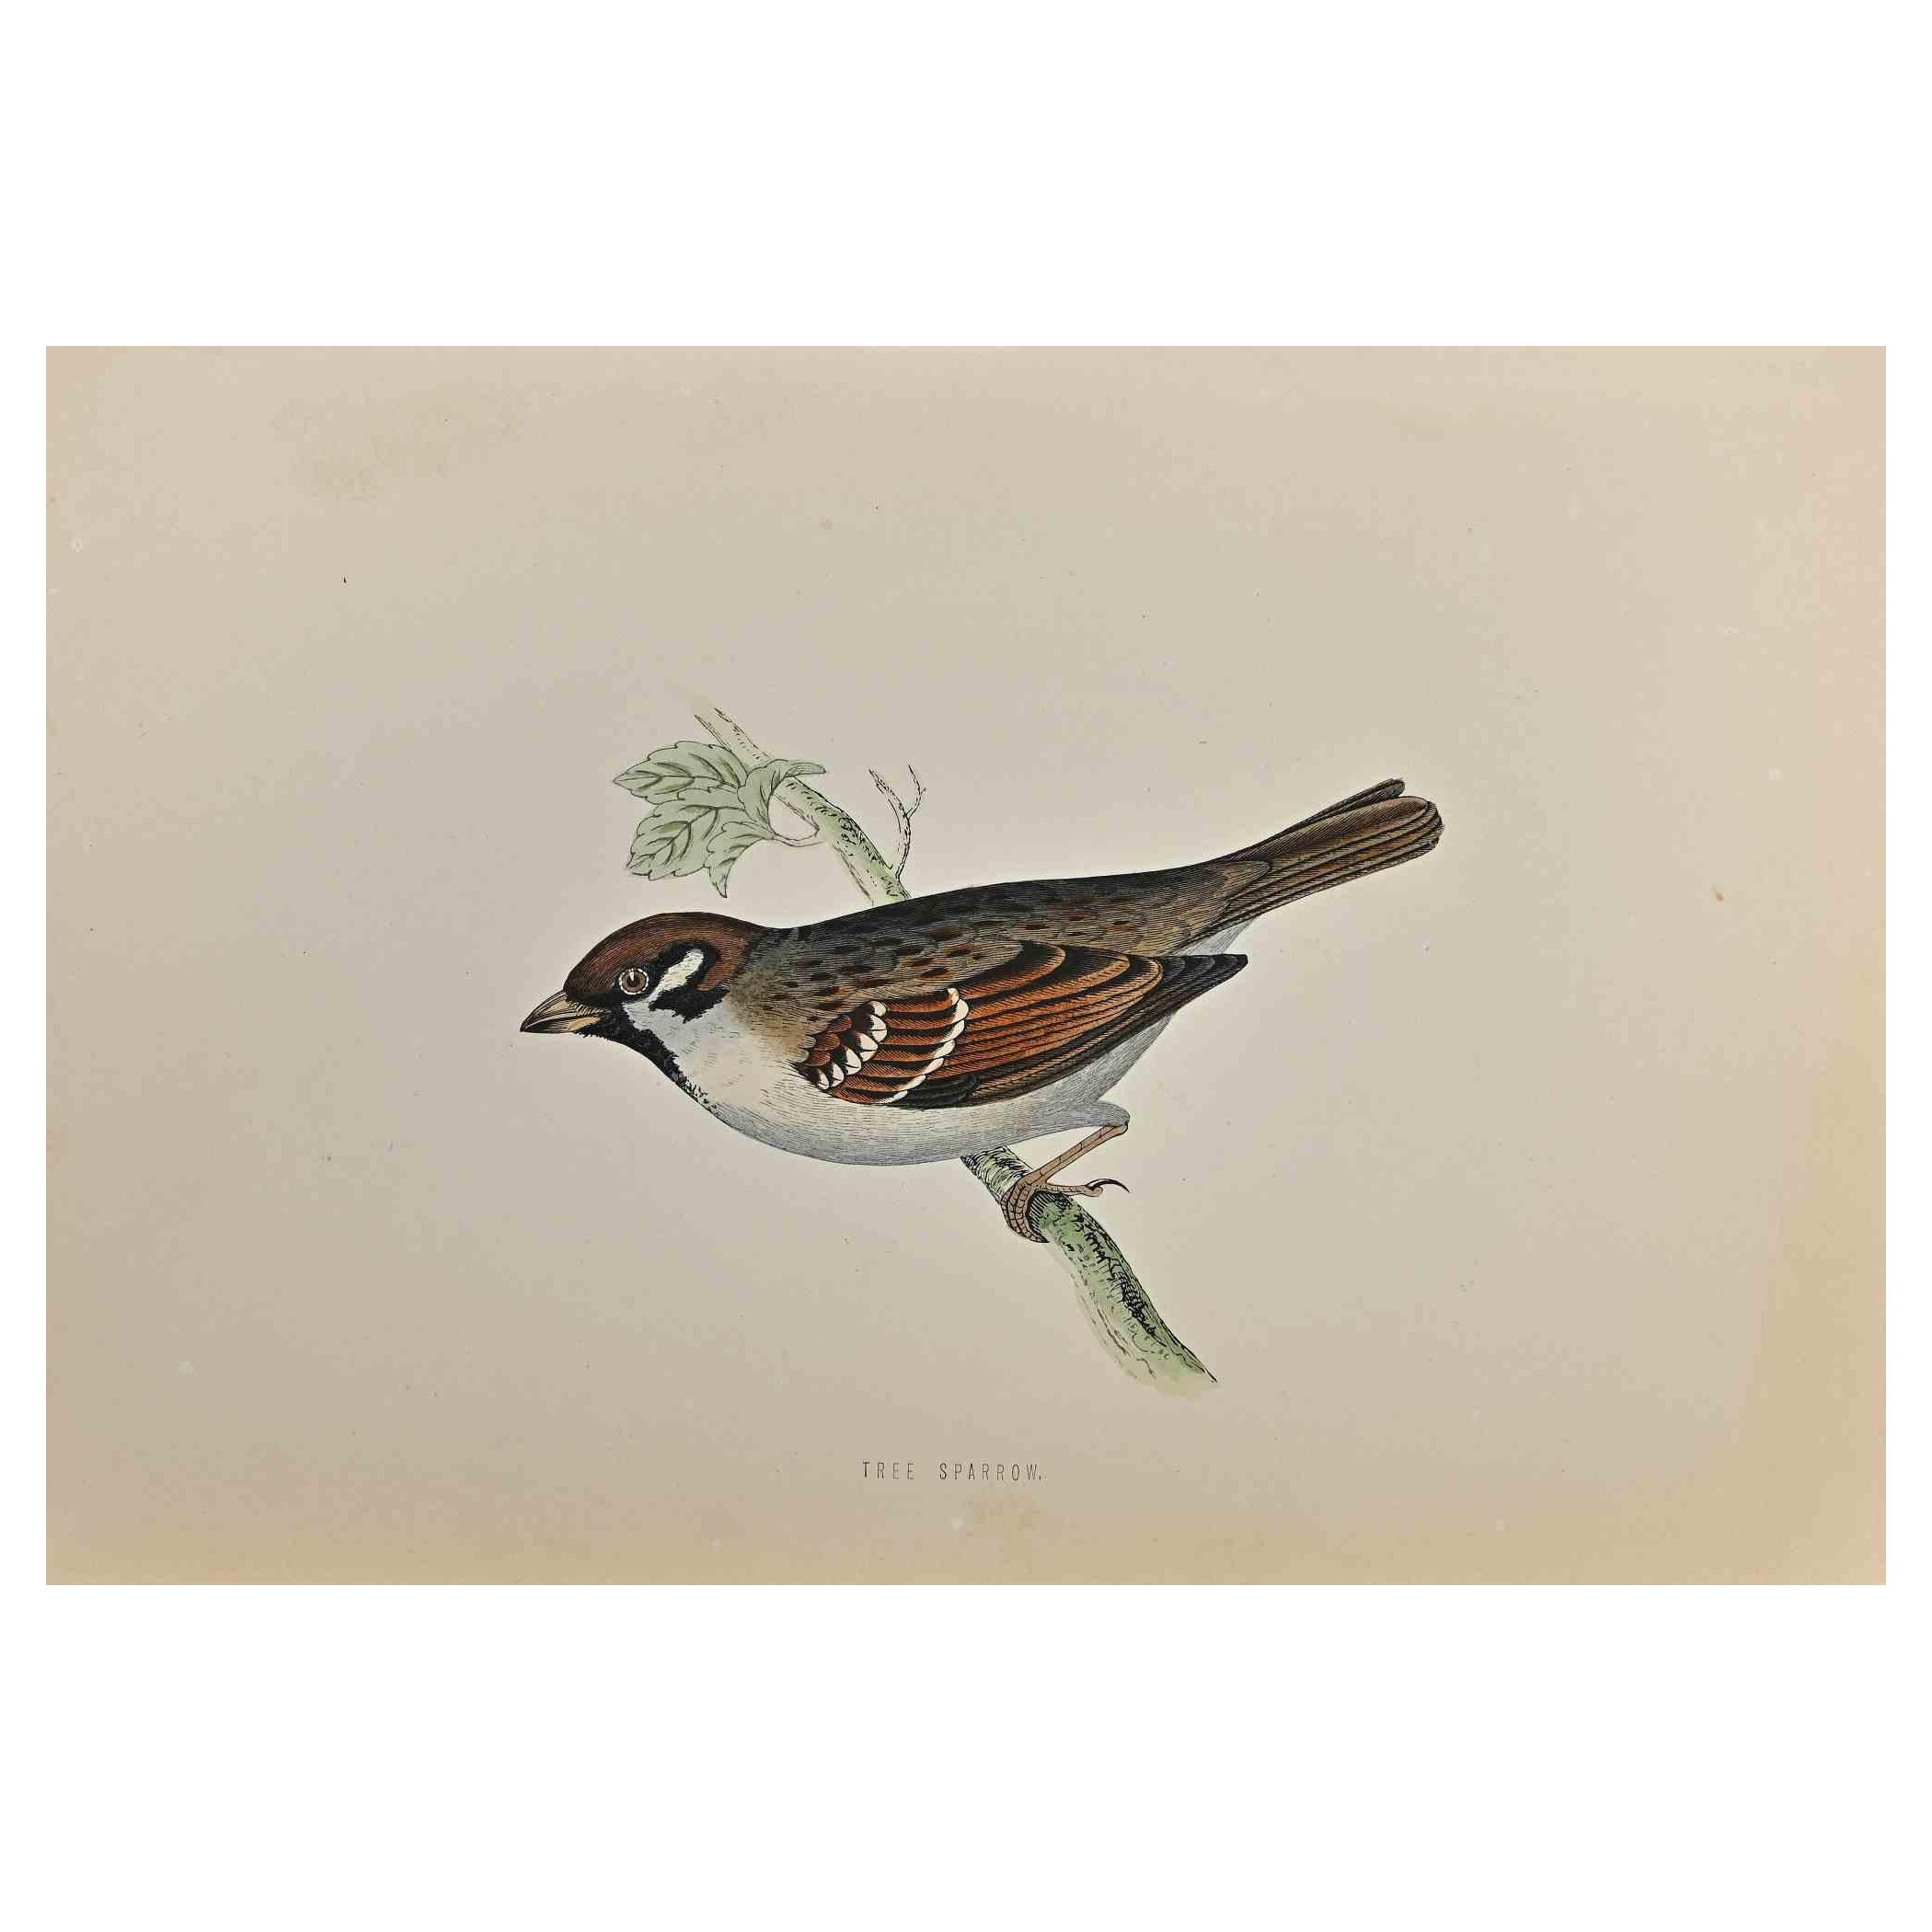 Tree Sparrow is a modern artwork realized in 1870 by the British artist Alexander Francis Lydon (1836-1917) . 

Woodcut print, hand colored, published by London, Bell & Sons, 1870.  Name of the bird printed in plate. This work is part of a print